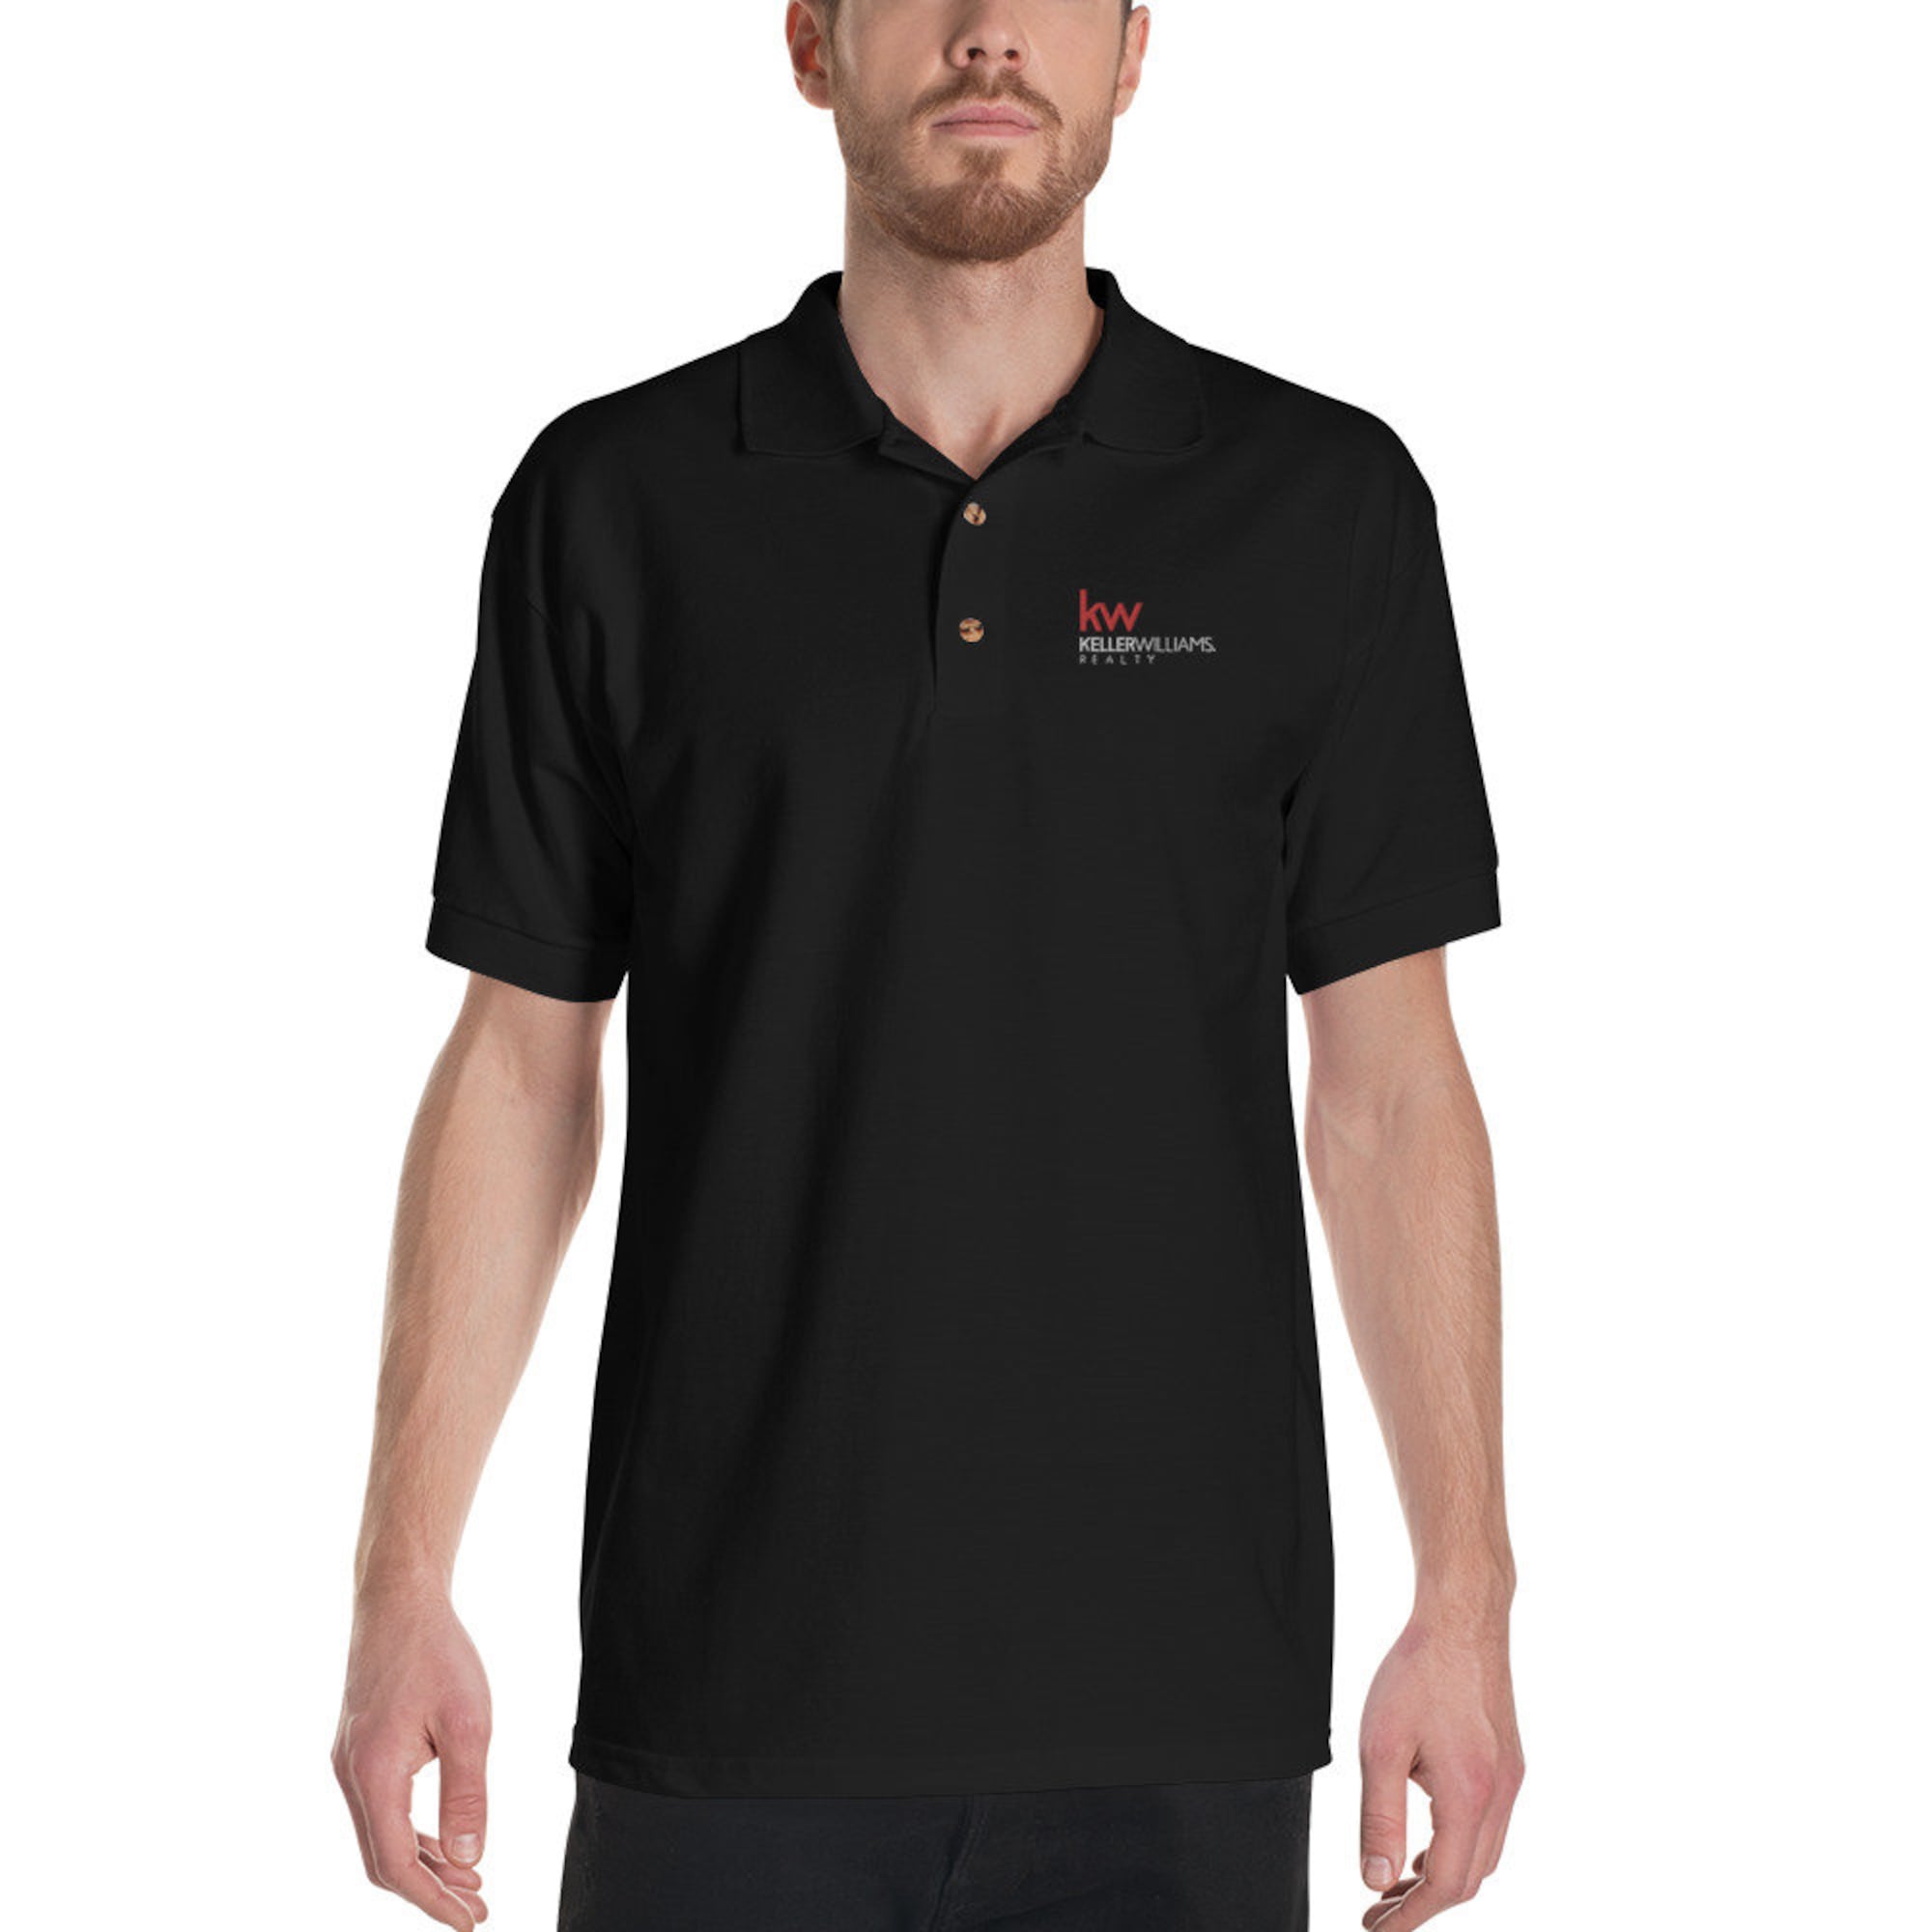 Keller Williams Embroidered Polo shirt